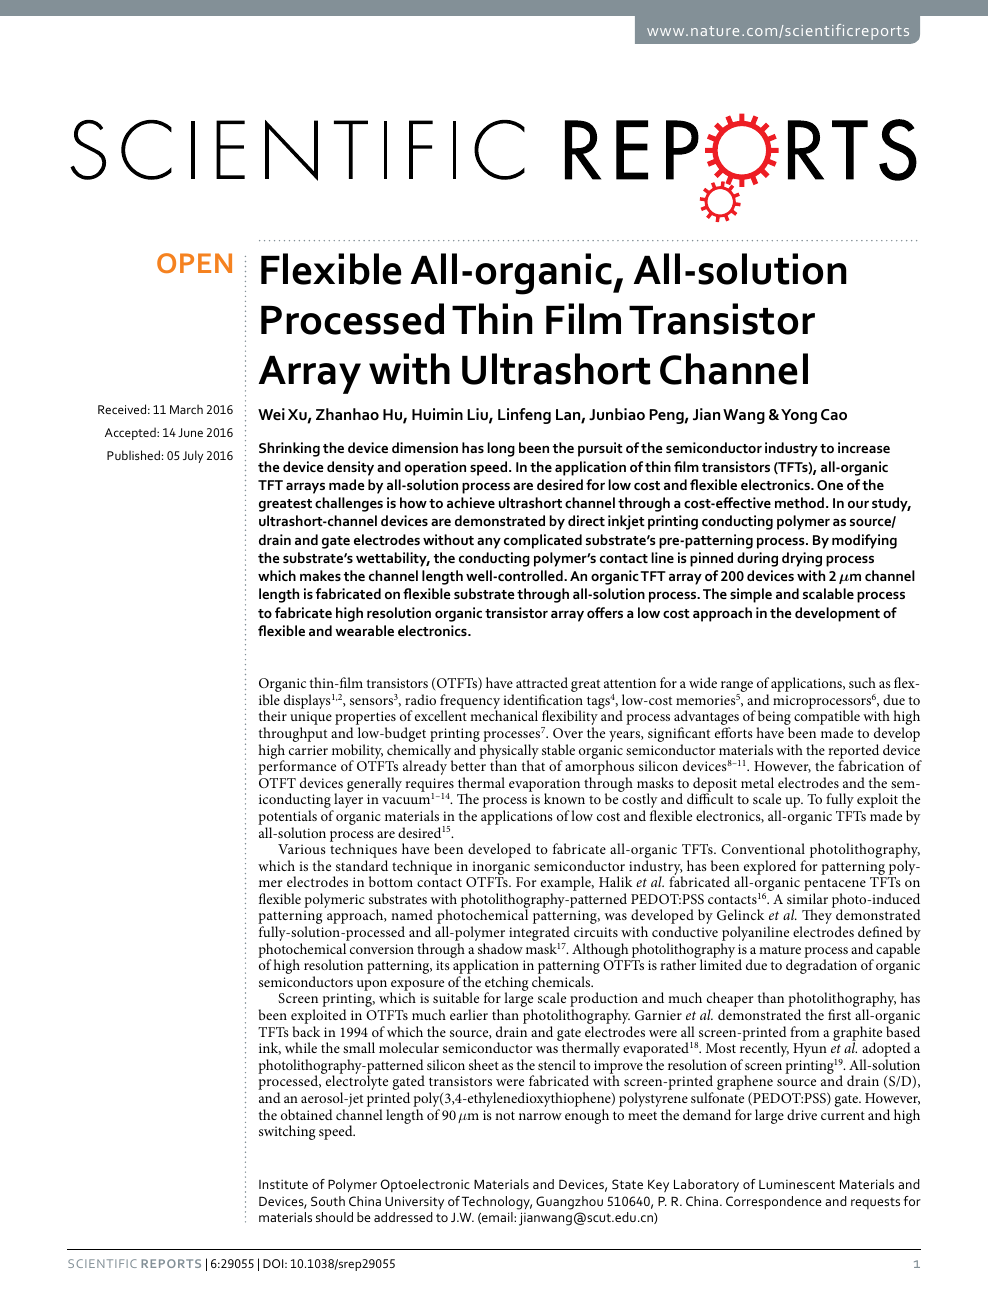 Flexible All Organic All Solution Processed Thin Film Transistor Array With Ultrashort Channel Topic Of Research Paper In Nano Technology Download Scholarly Article Pdf And Read For Free On Cyberleninka Open Science Hub